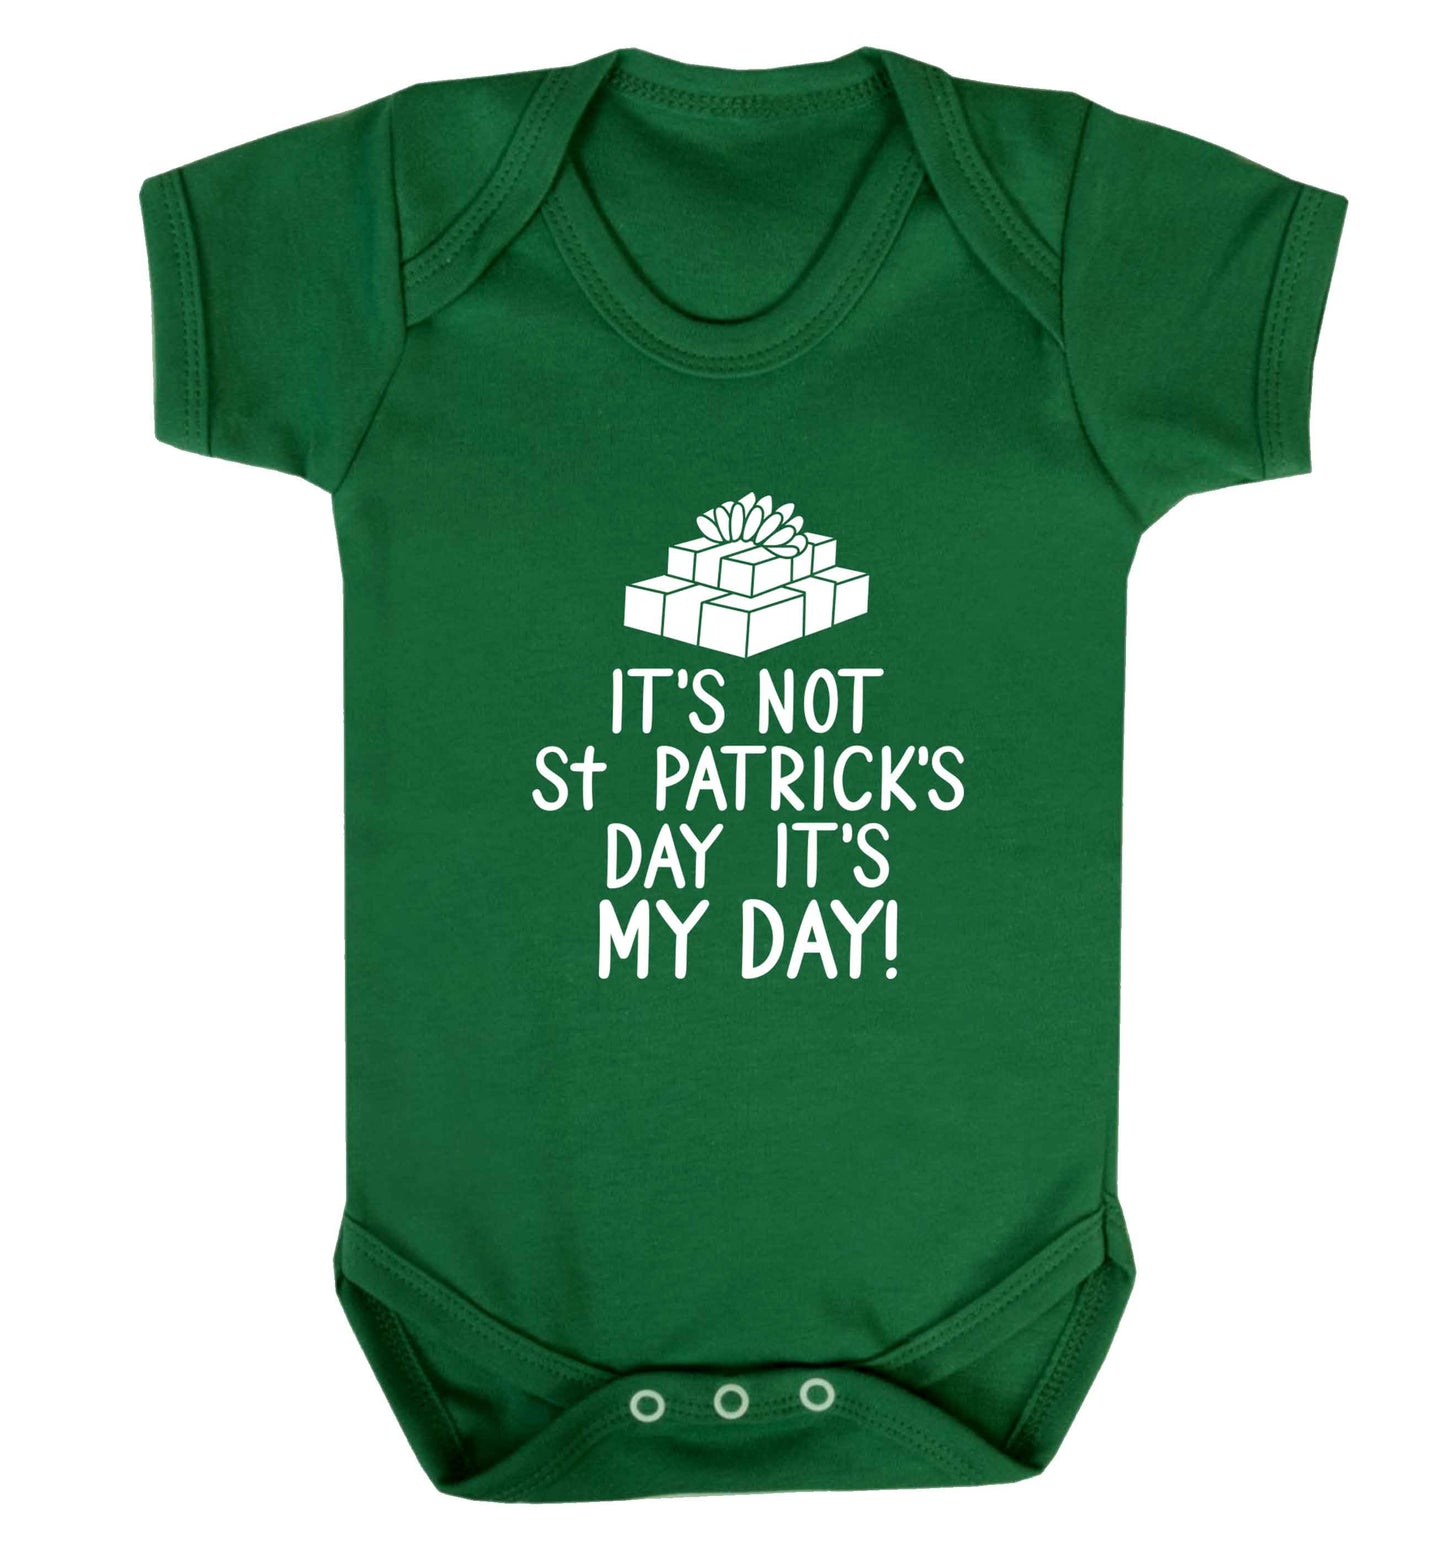 Funny gifts for your mum on mother's dayor her birthday! It's not St Patricks day it's my day baby vest green 18-24 months